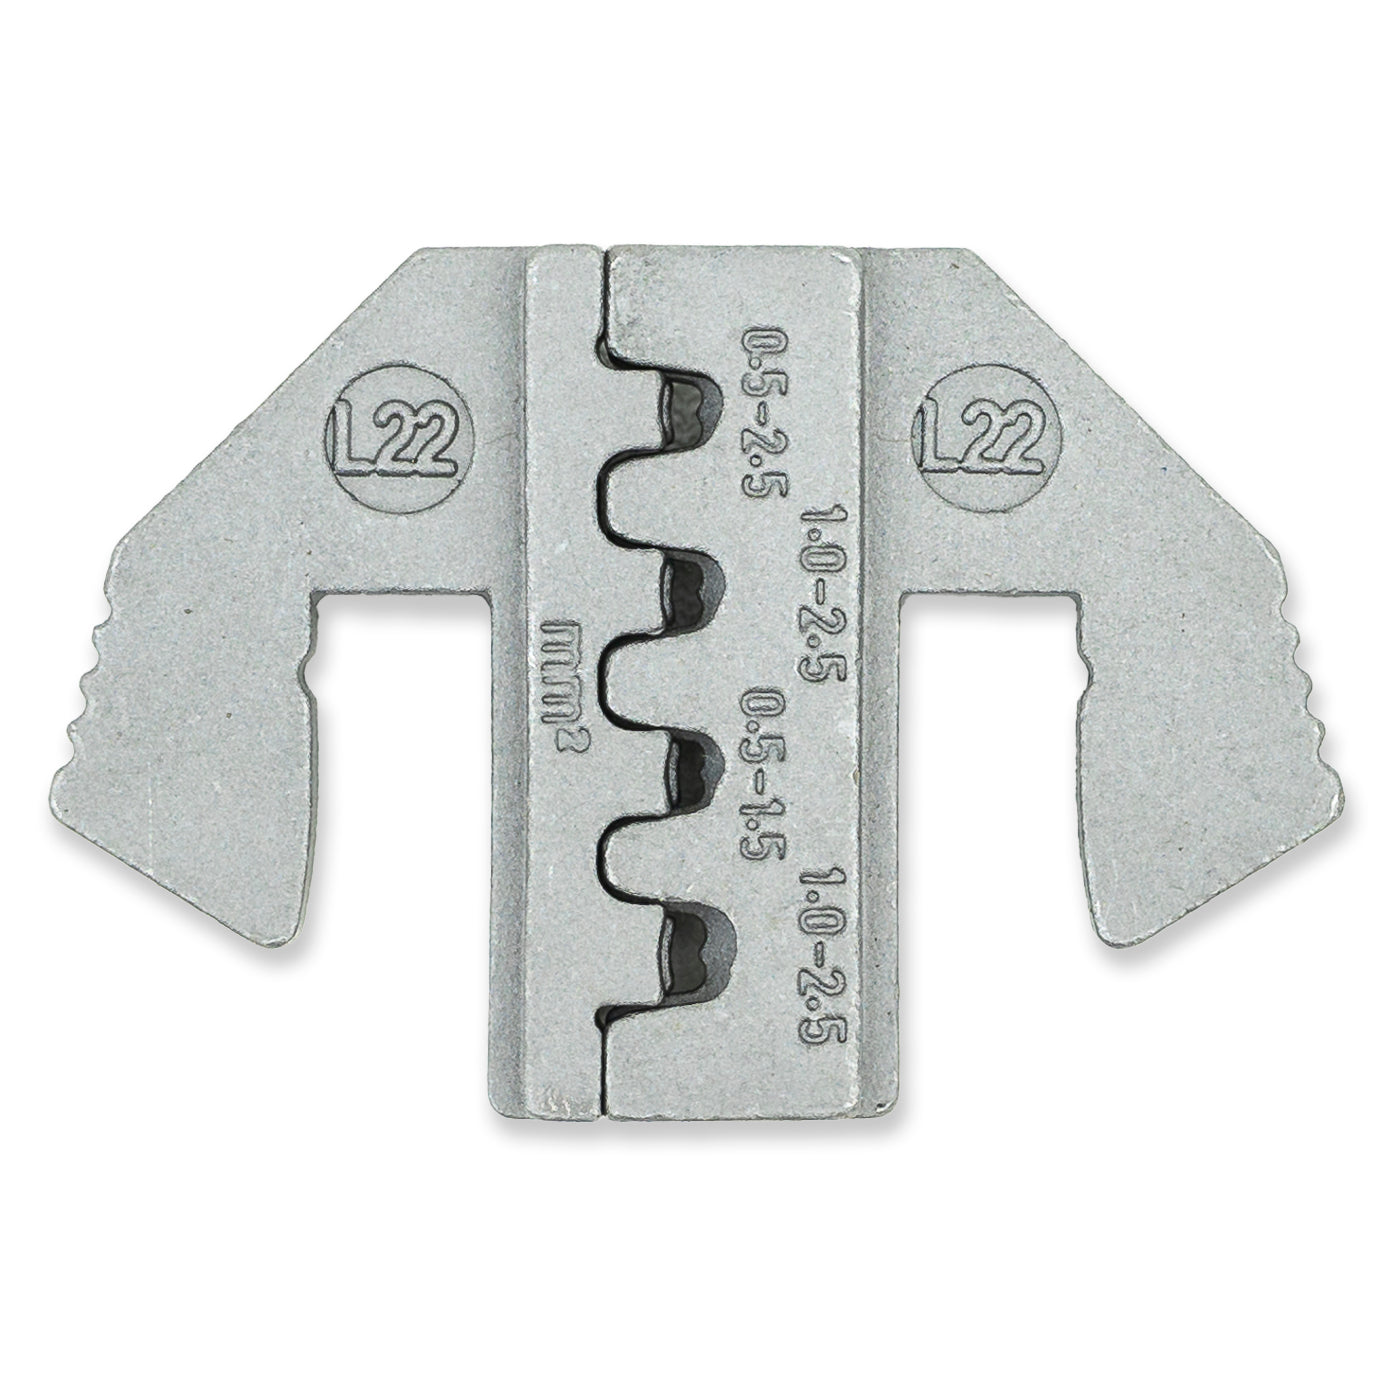 Crimping Tool Die - L22 Die for ST Receptacle Contacts 0.5-2.5/1.0-2.5/0.5-1.5/1.0-2.5 mm2 - Tool Guy Republic